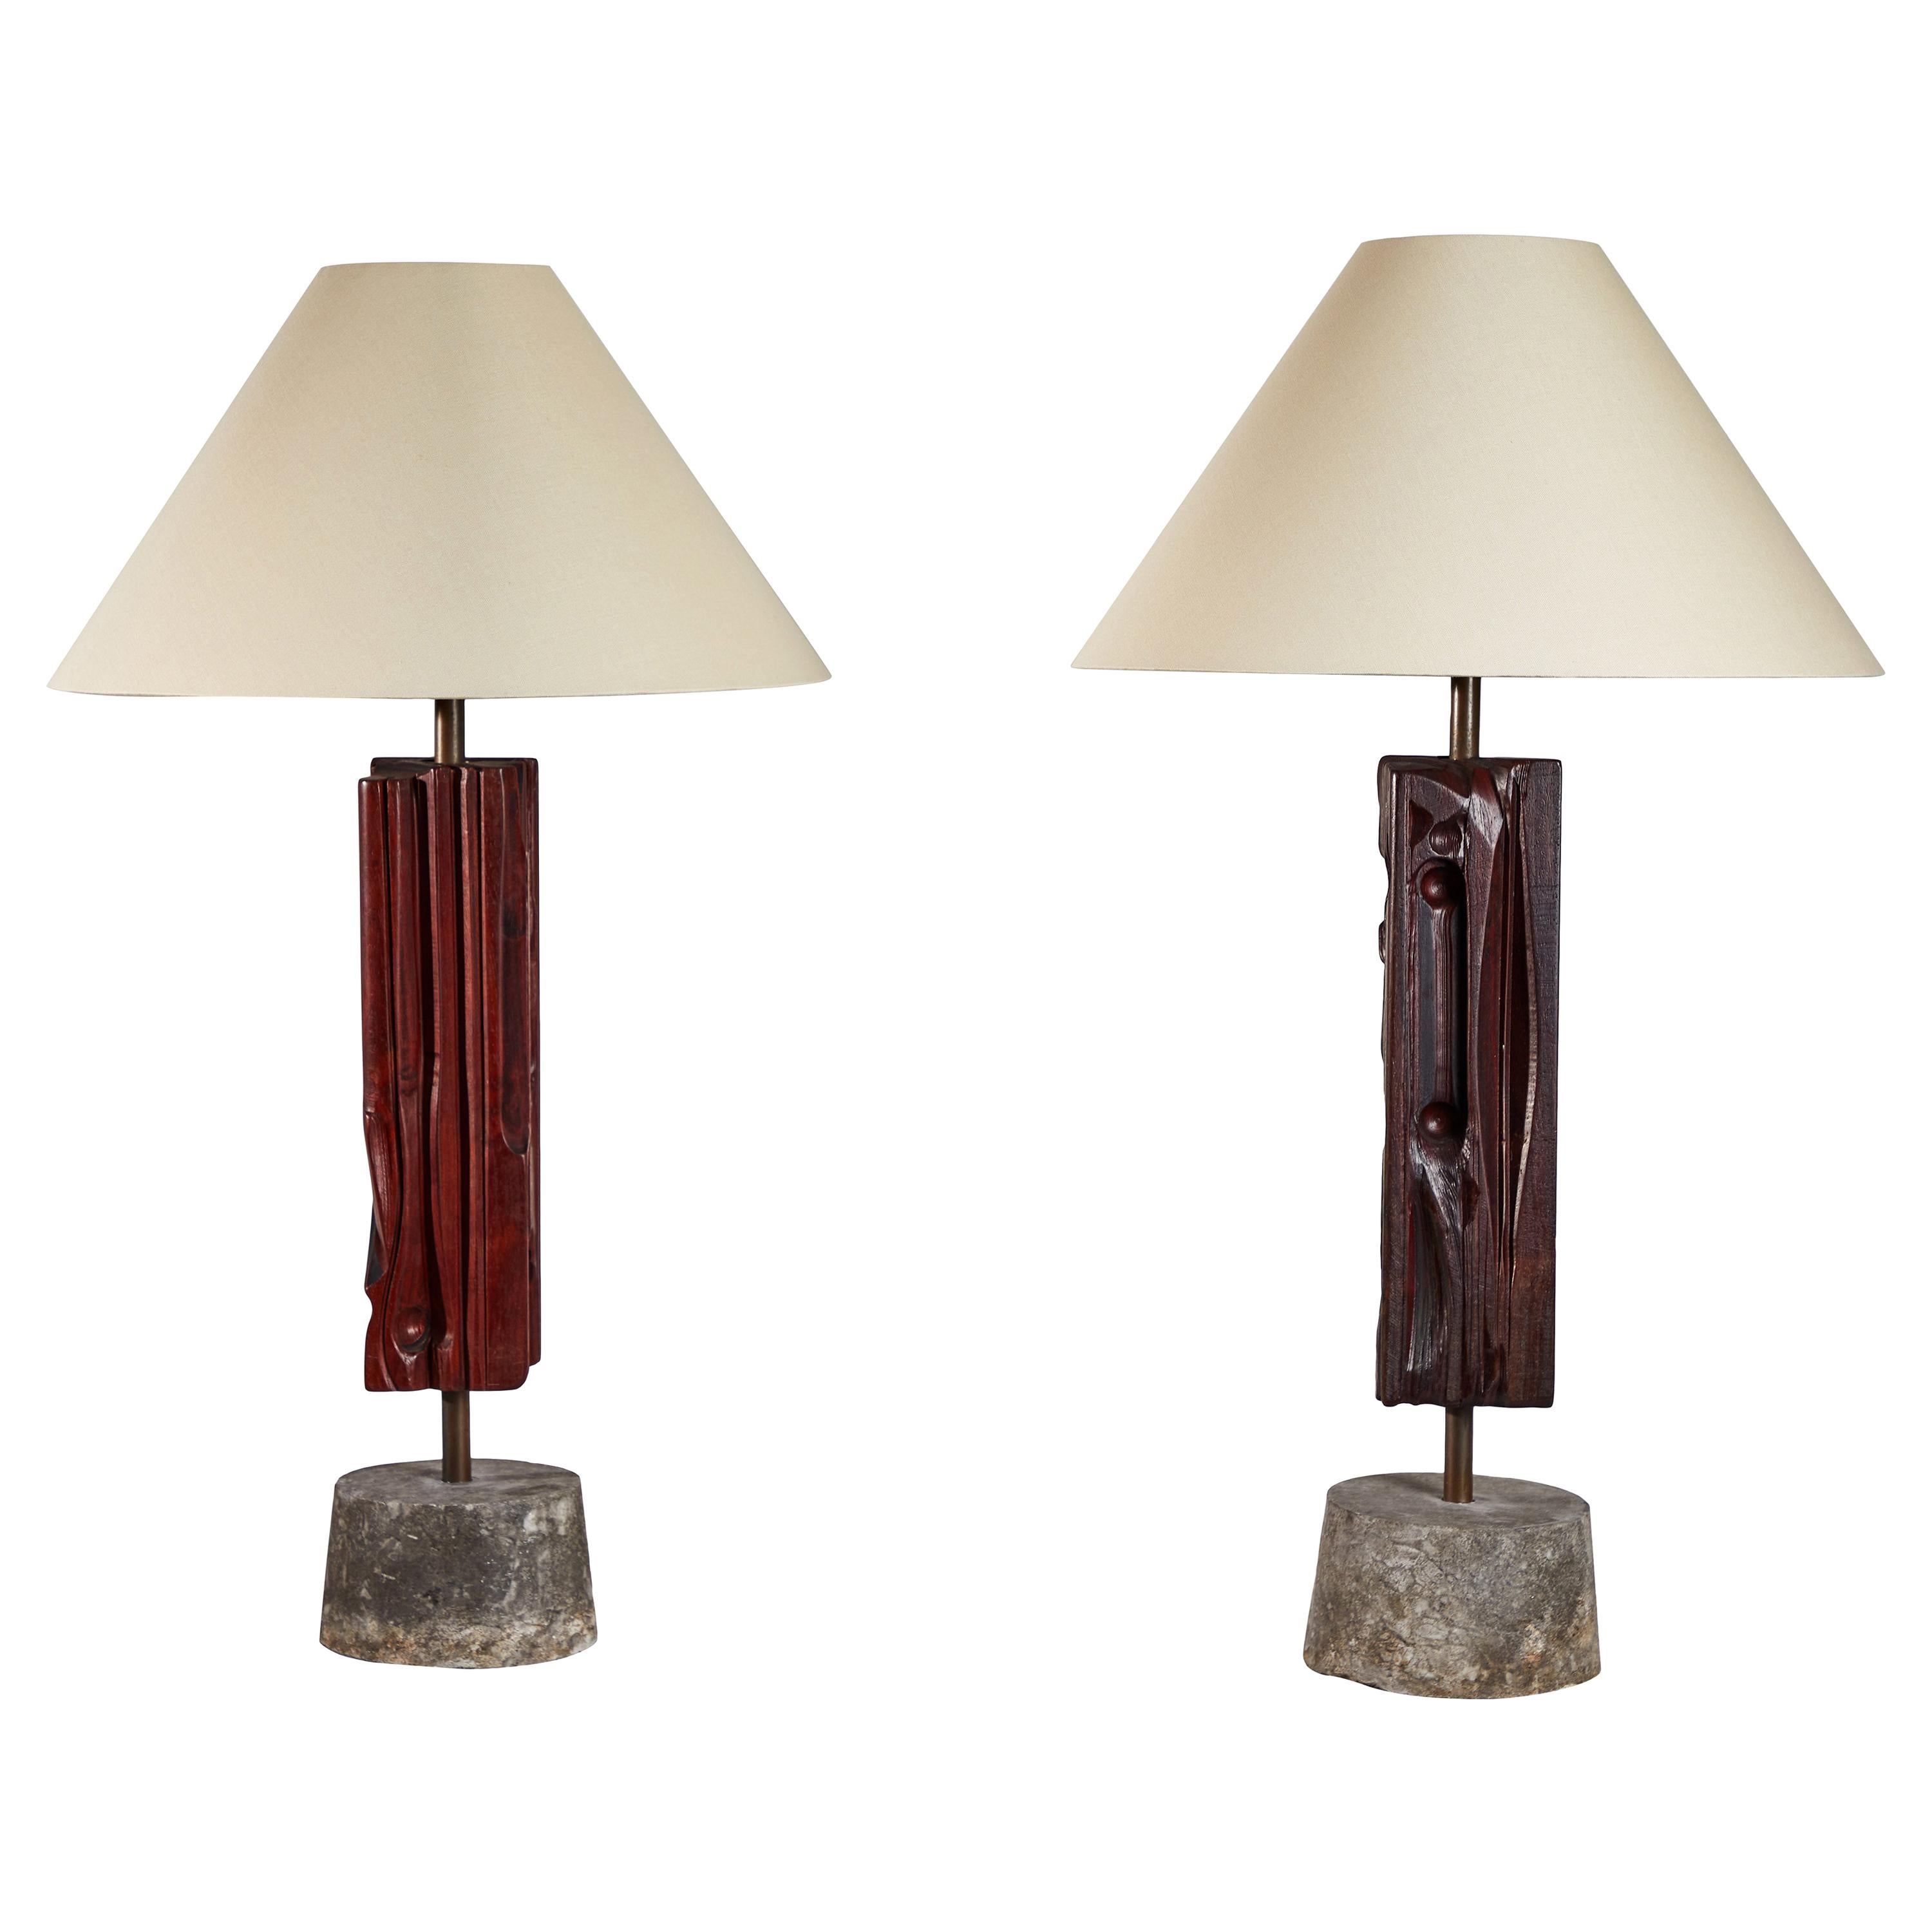 Pair of Sculptural Table Lamps by Yasuo Fuke